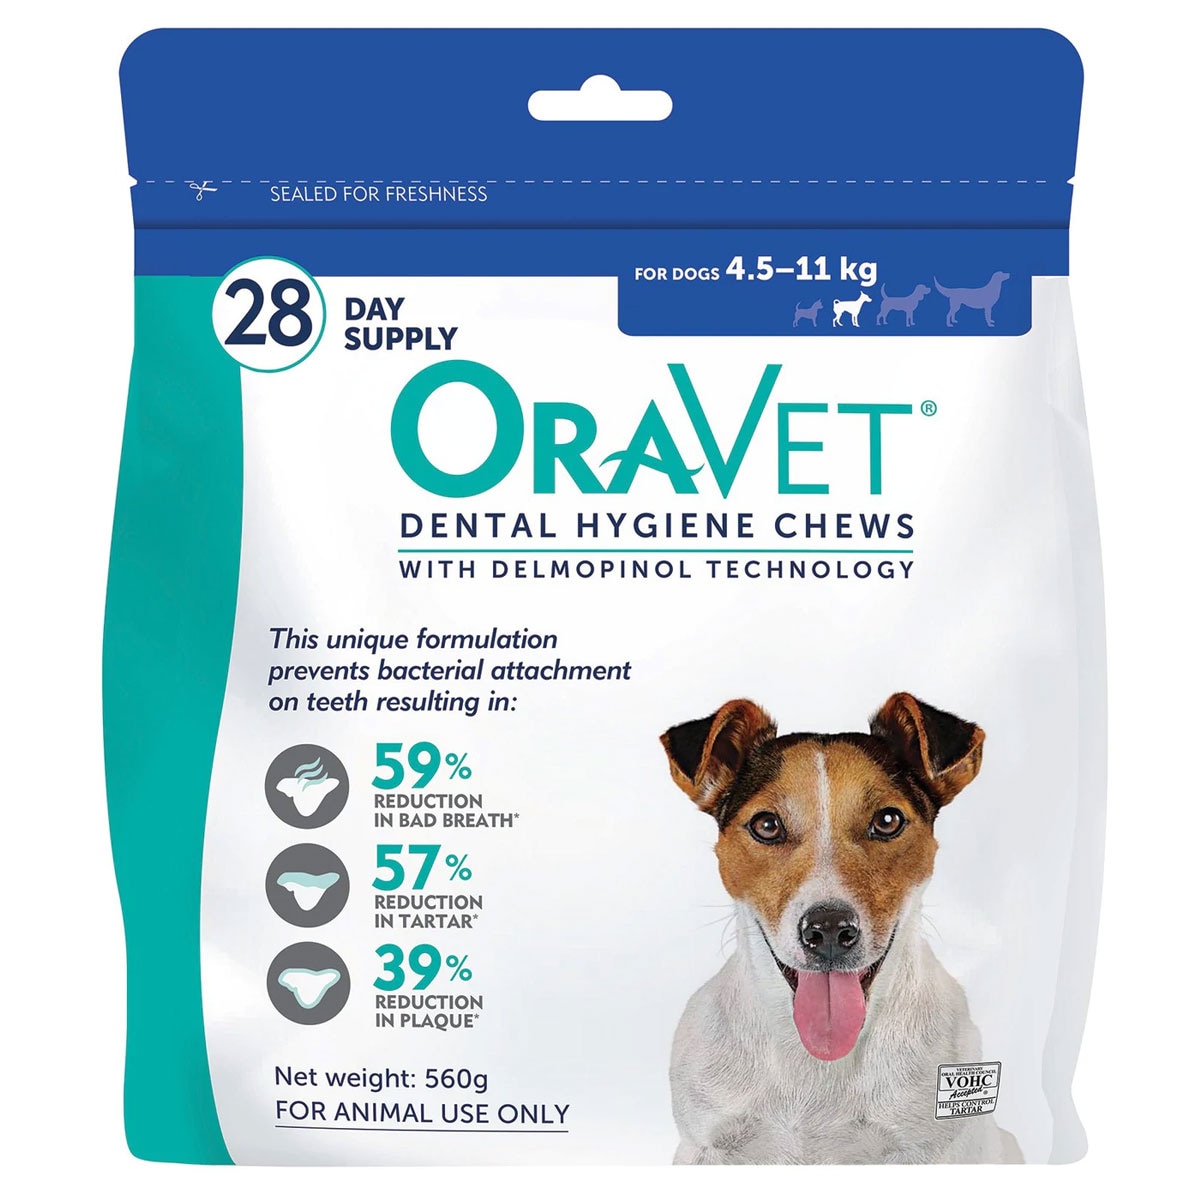 OraVet Dental Hygiene Chews for Small Dogs 28 Day Supply